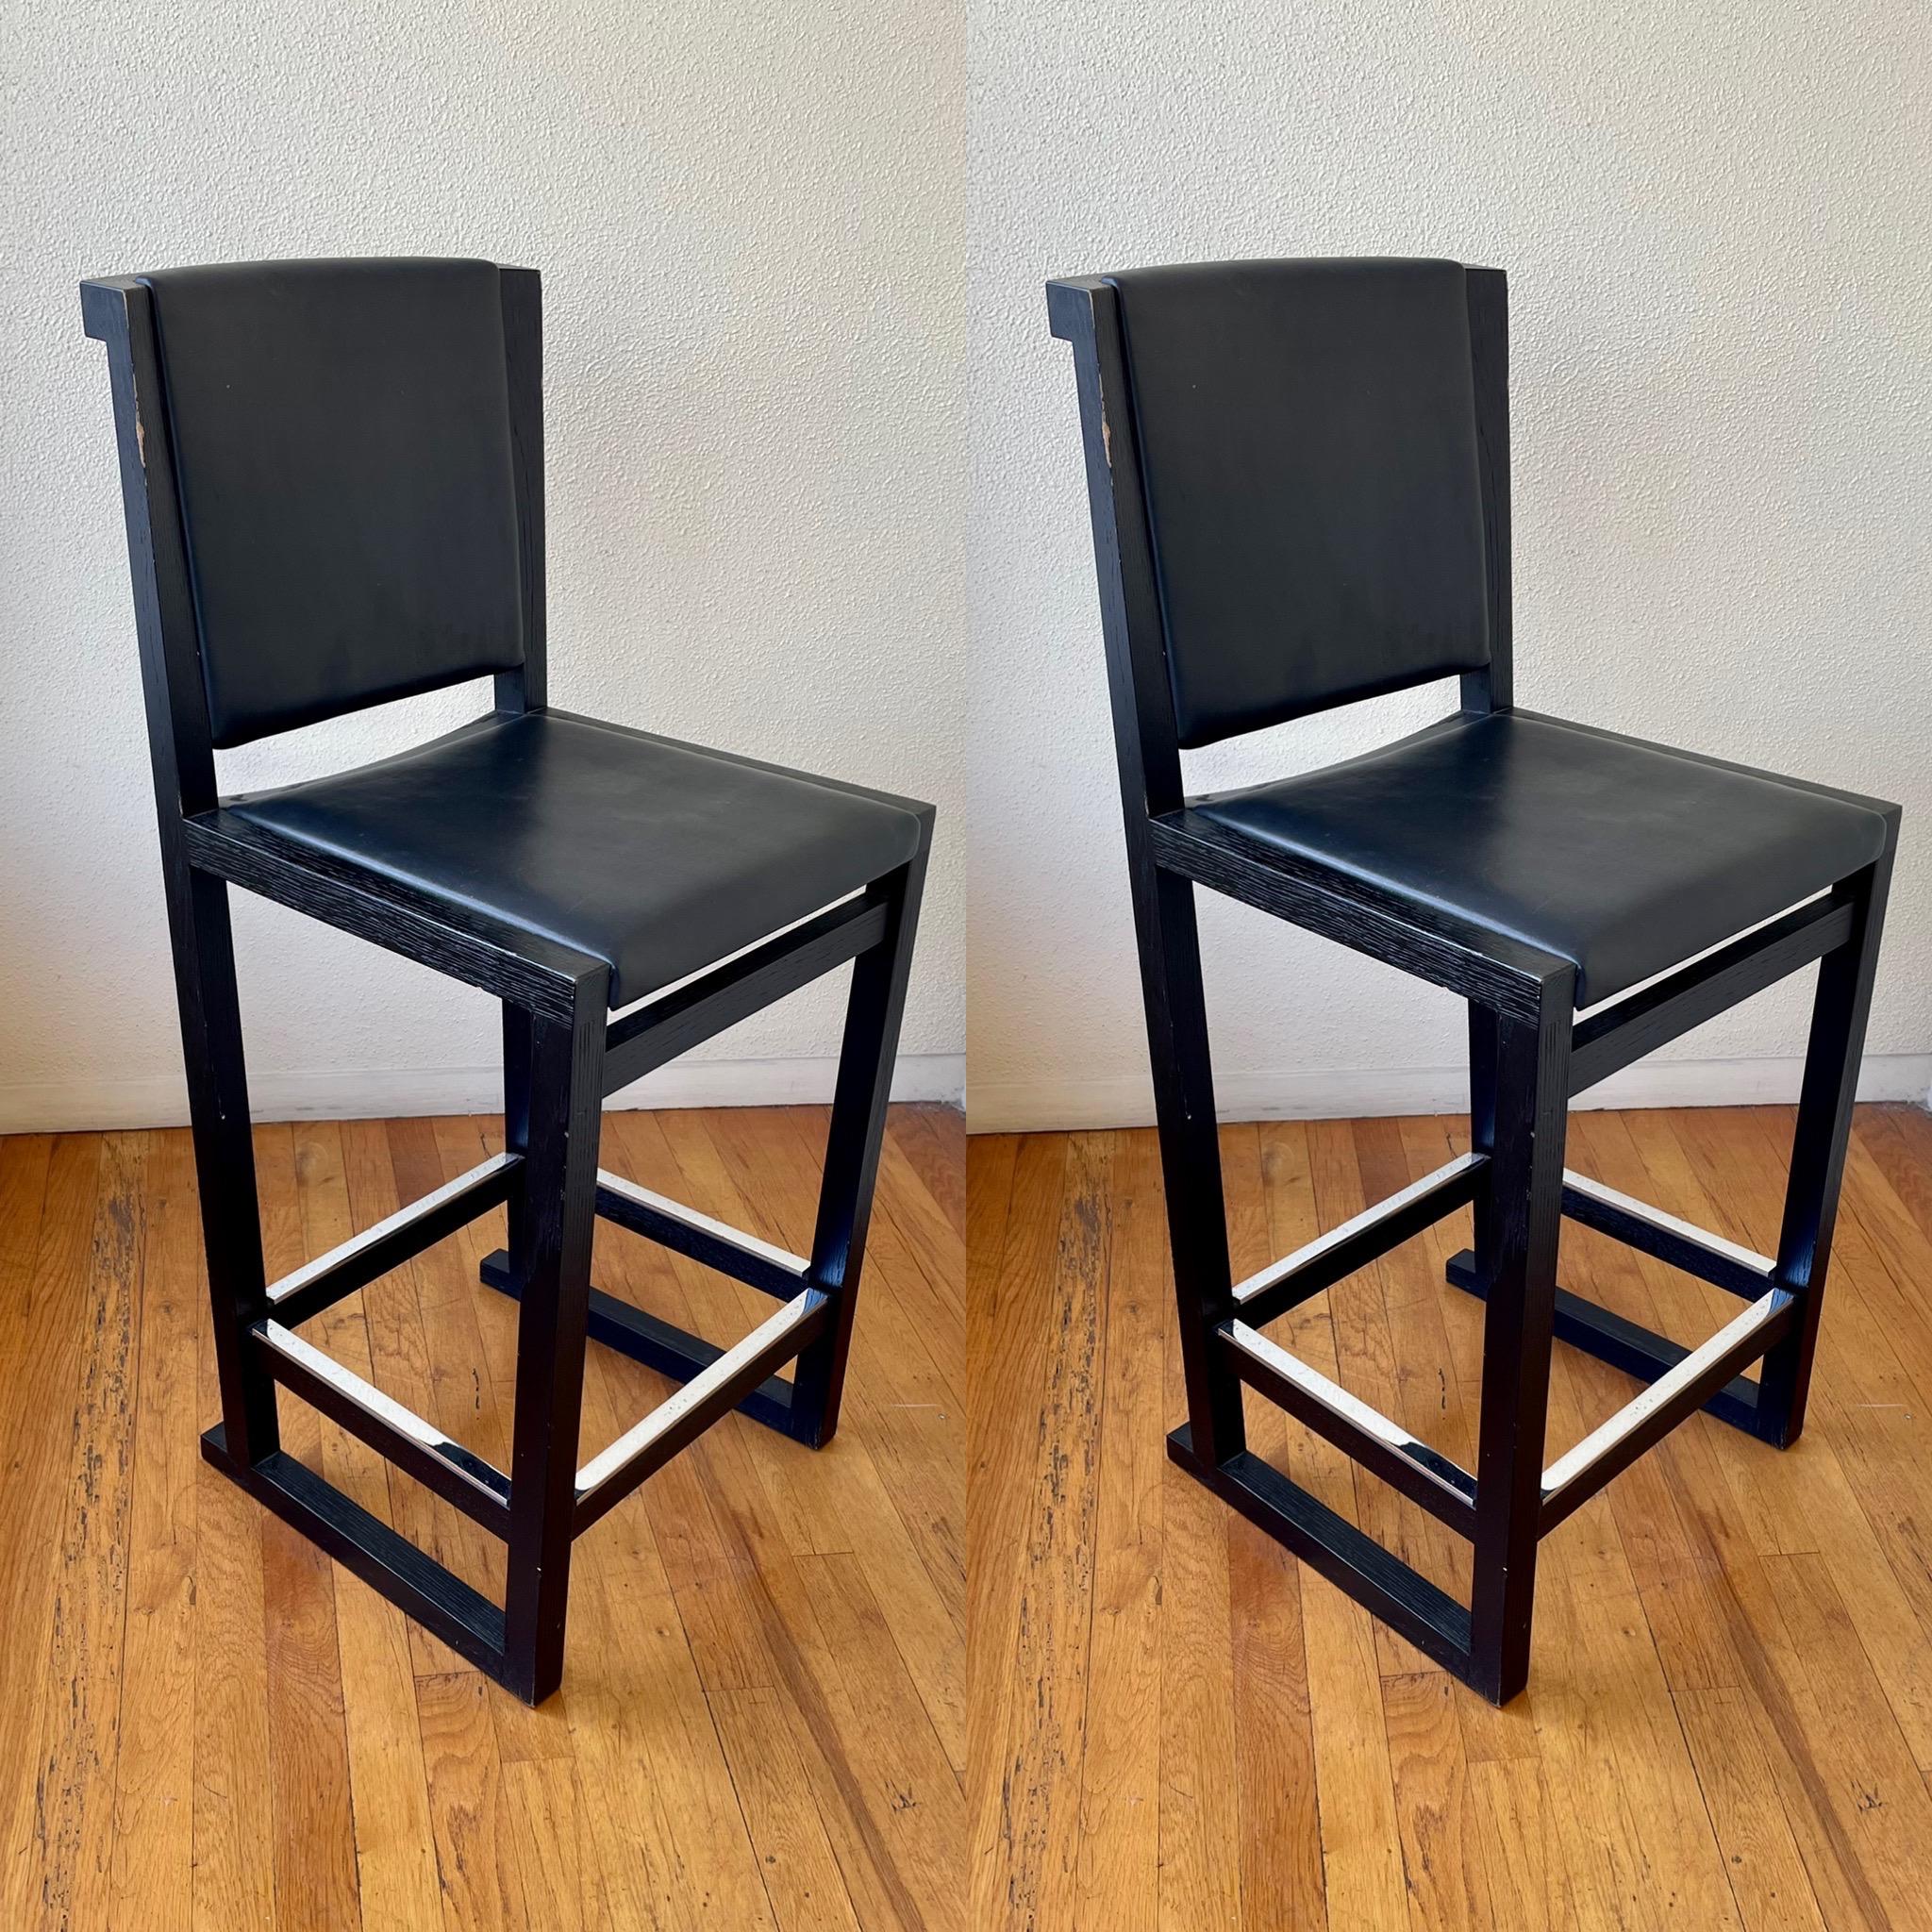 Great pair of solid oak ebonized frames barstools with leather seat and back and chrome footrest we have polished and cleaned the chrome to our best buts show wear and pitting due to age.